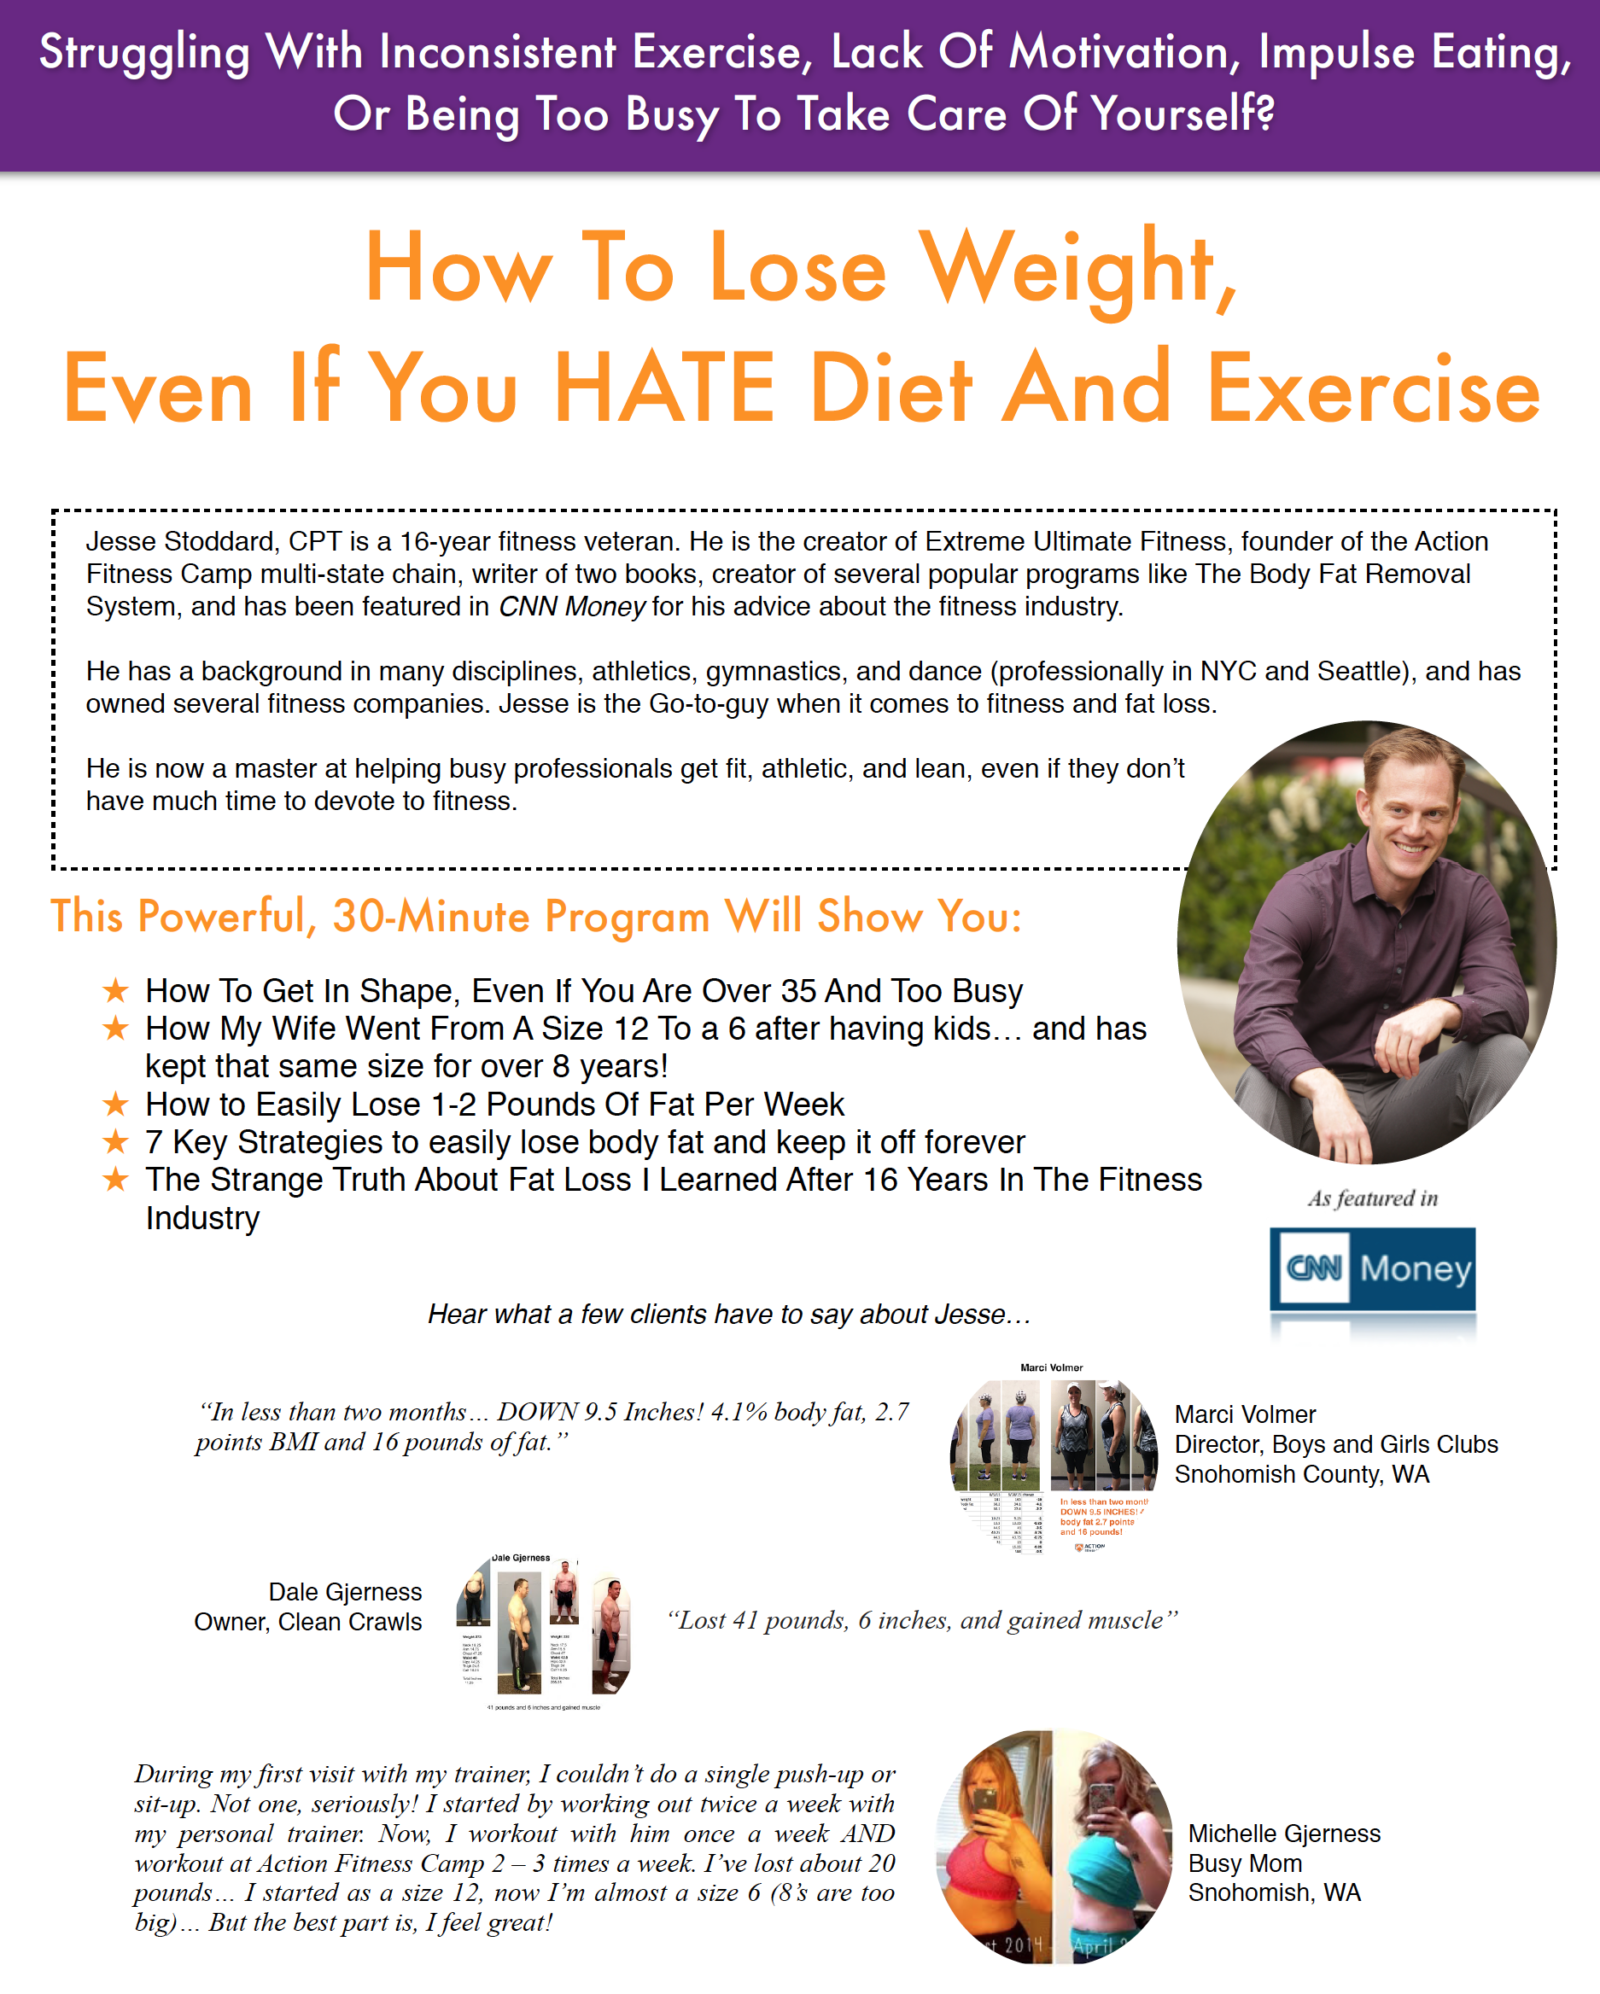 how-to-lose-weight-even-if-you-hate-diet-and-exercise